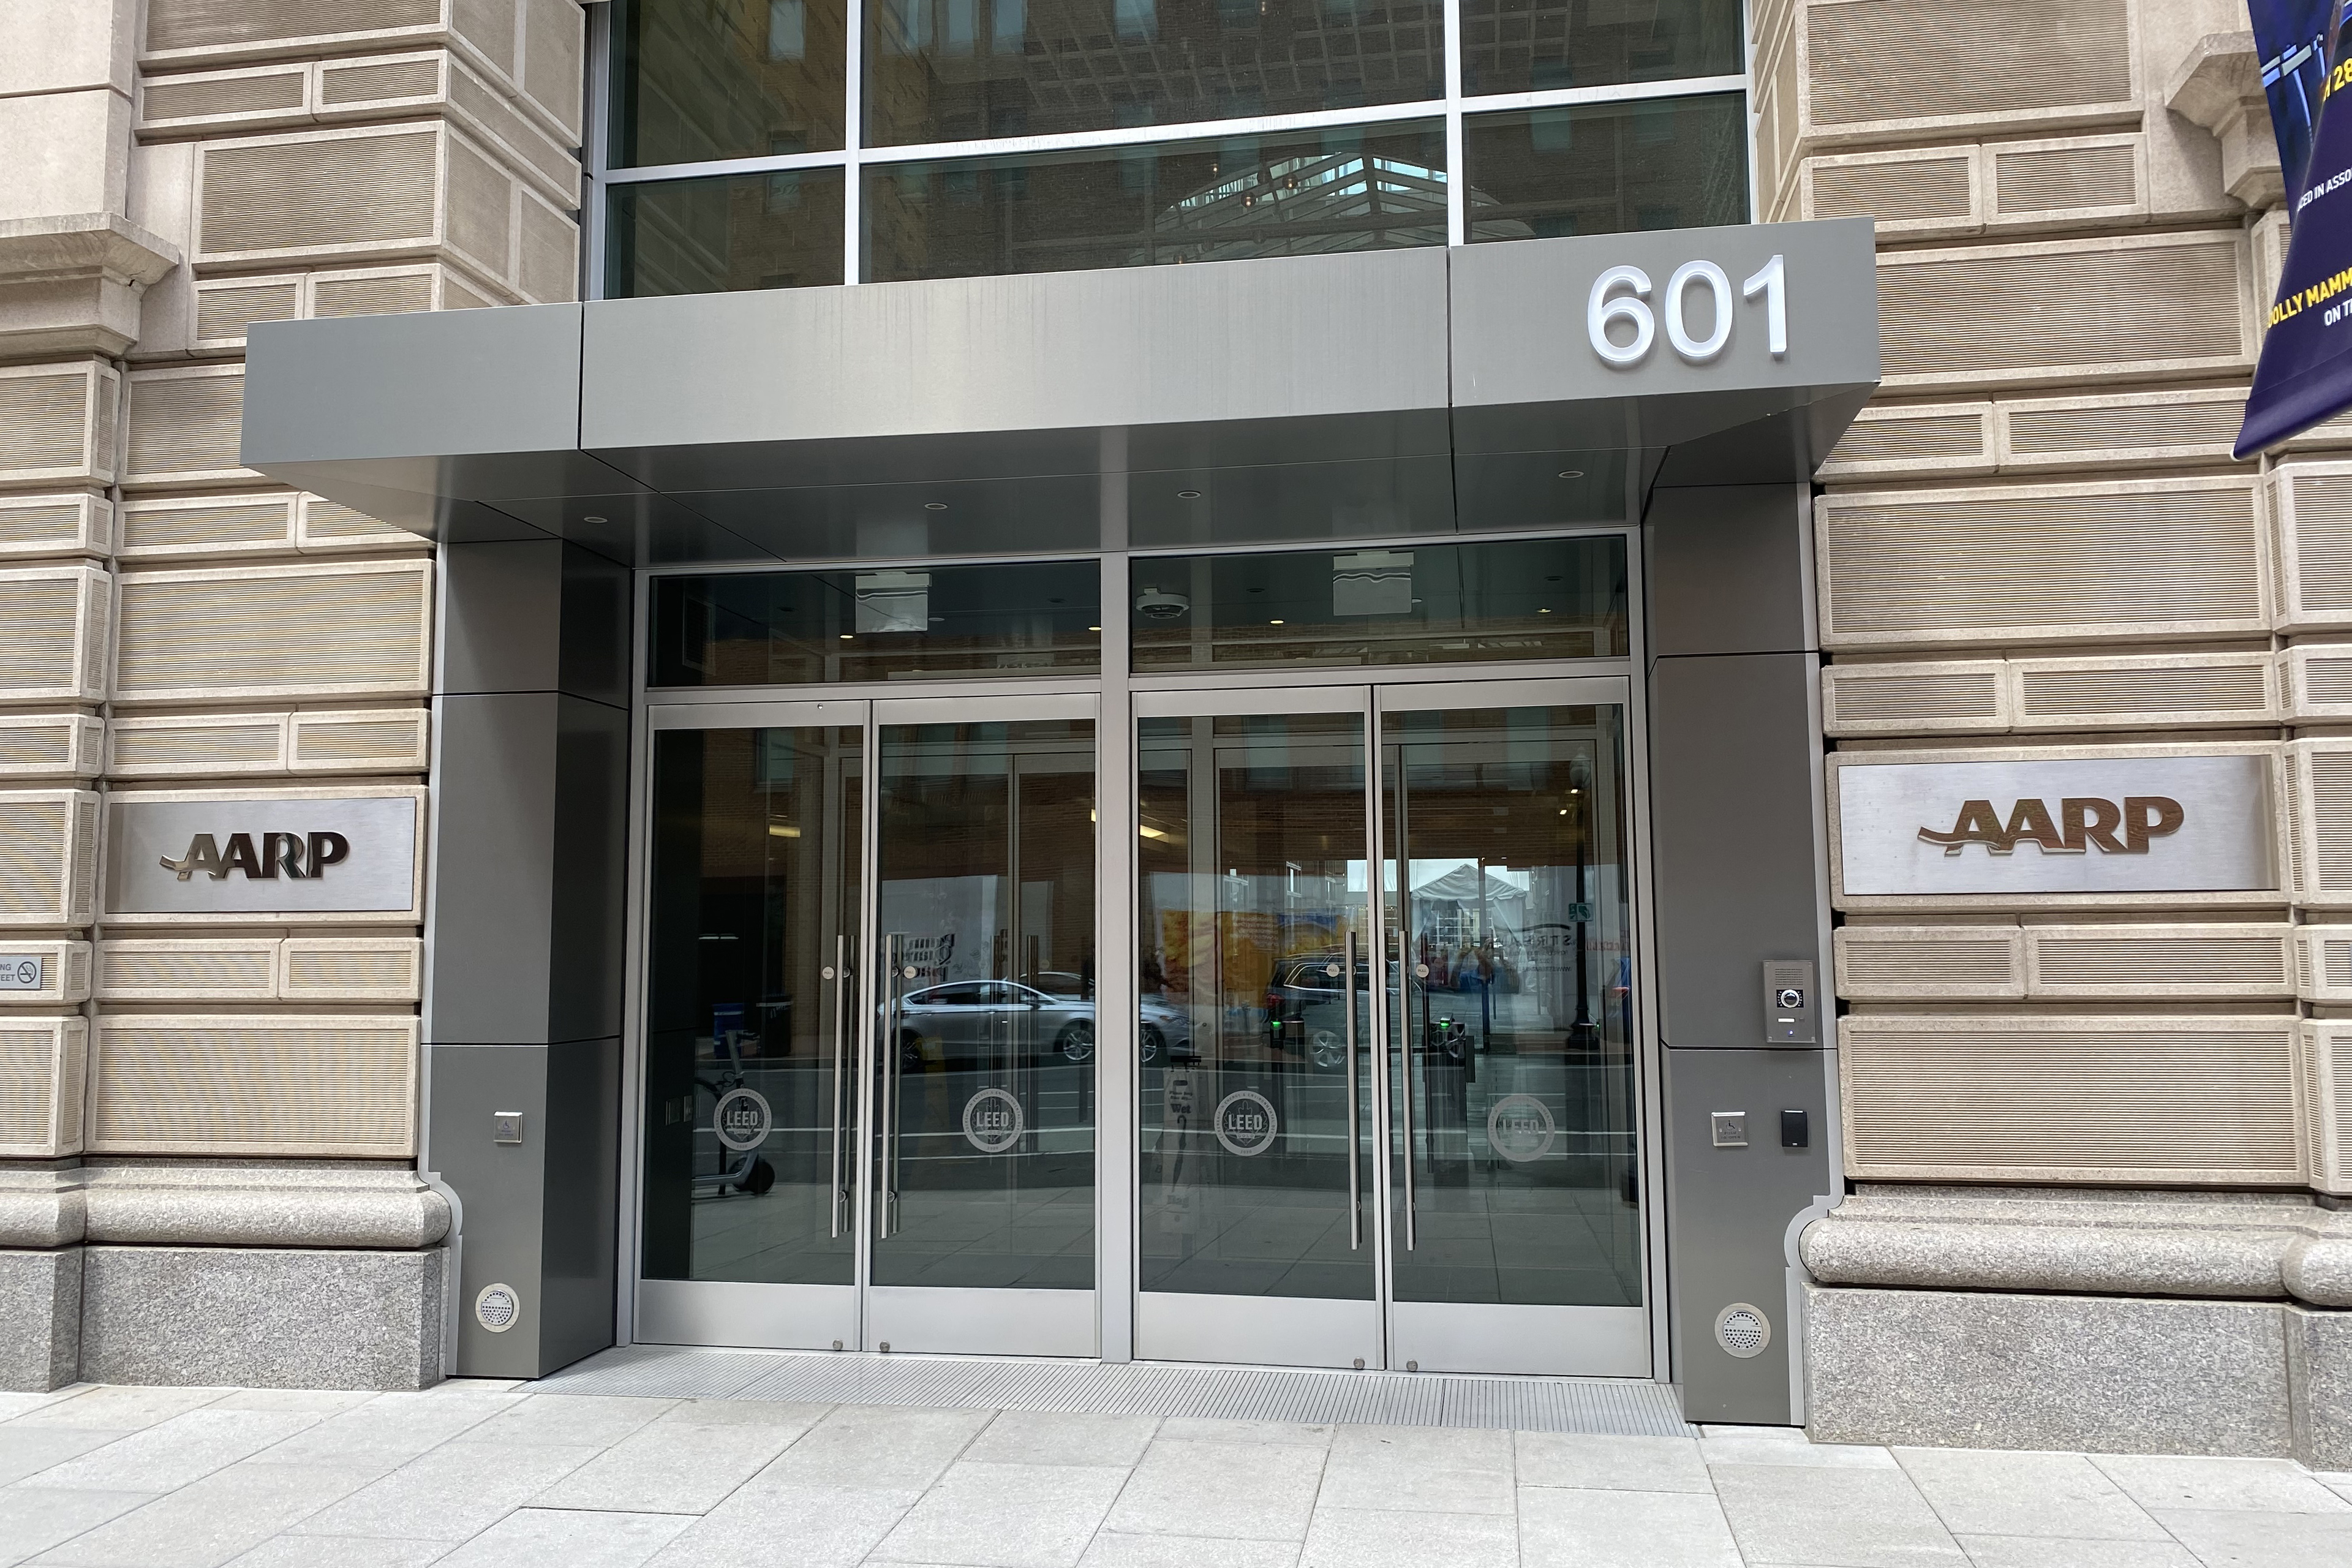 The exterior of an office building with glass doors at its entrance is seen in Washington. The AARP logo is emblazoned on the walls on each side of the entrance.